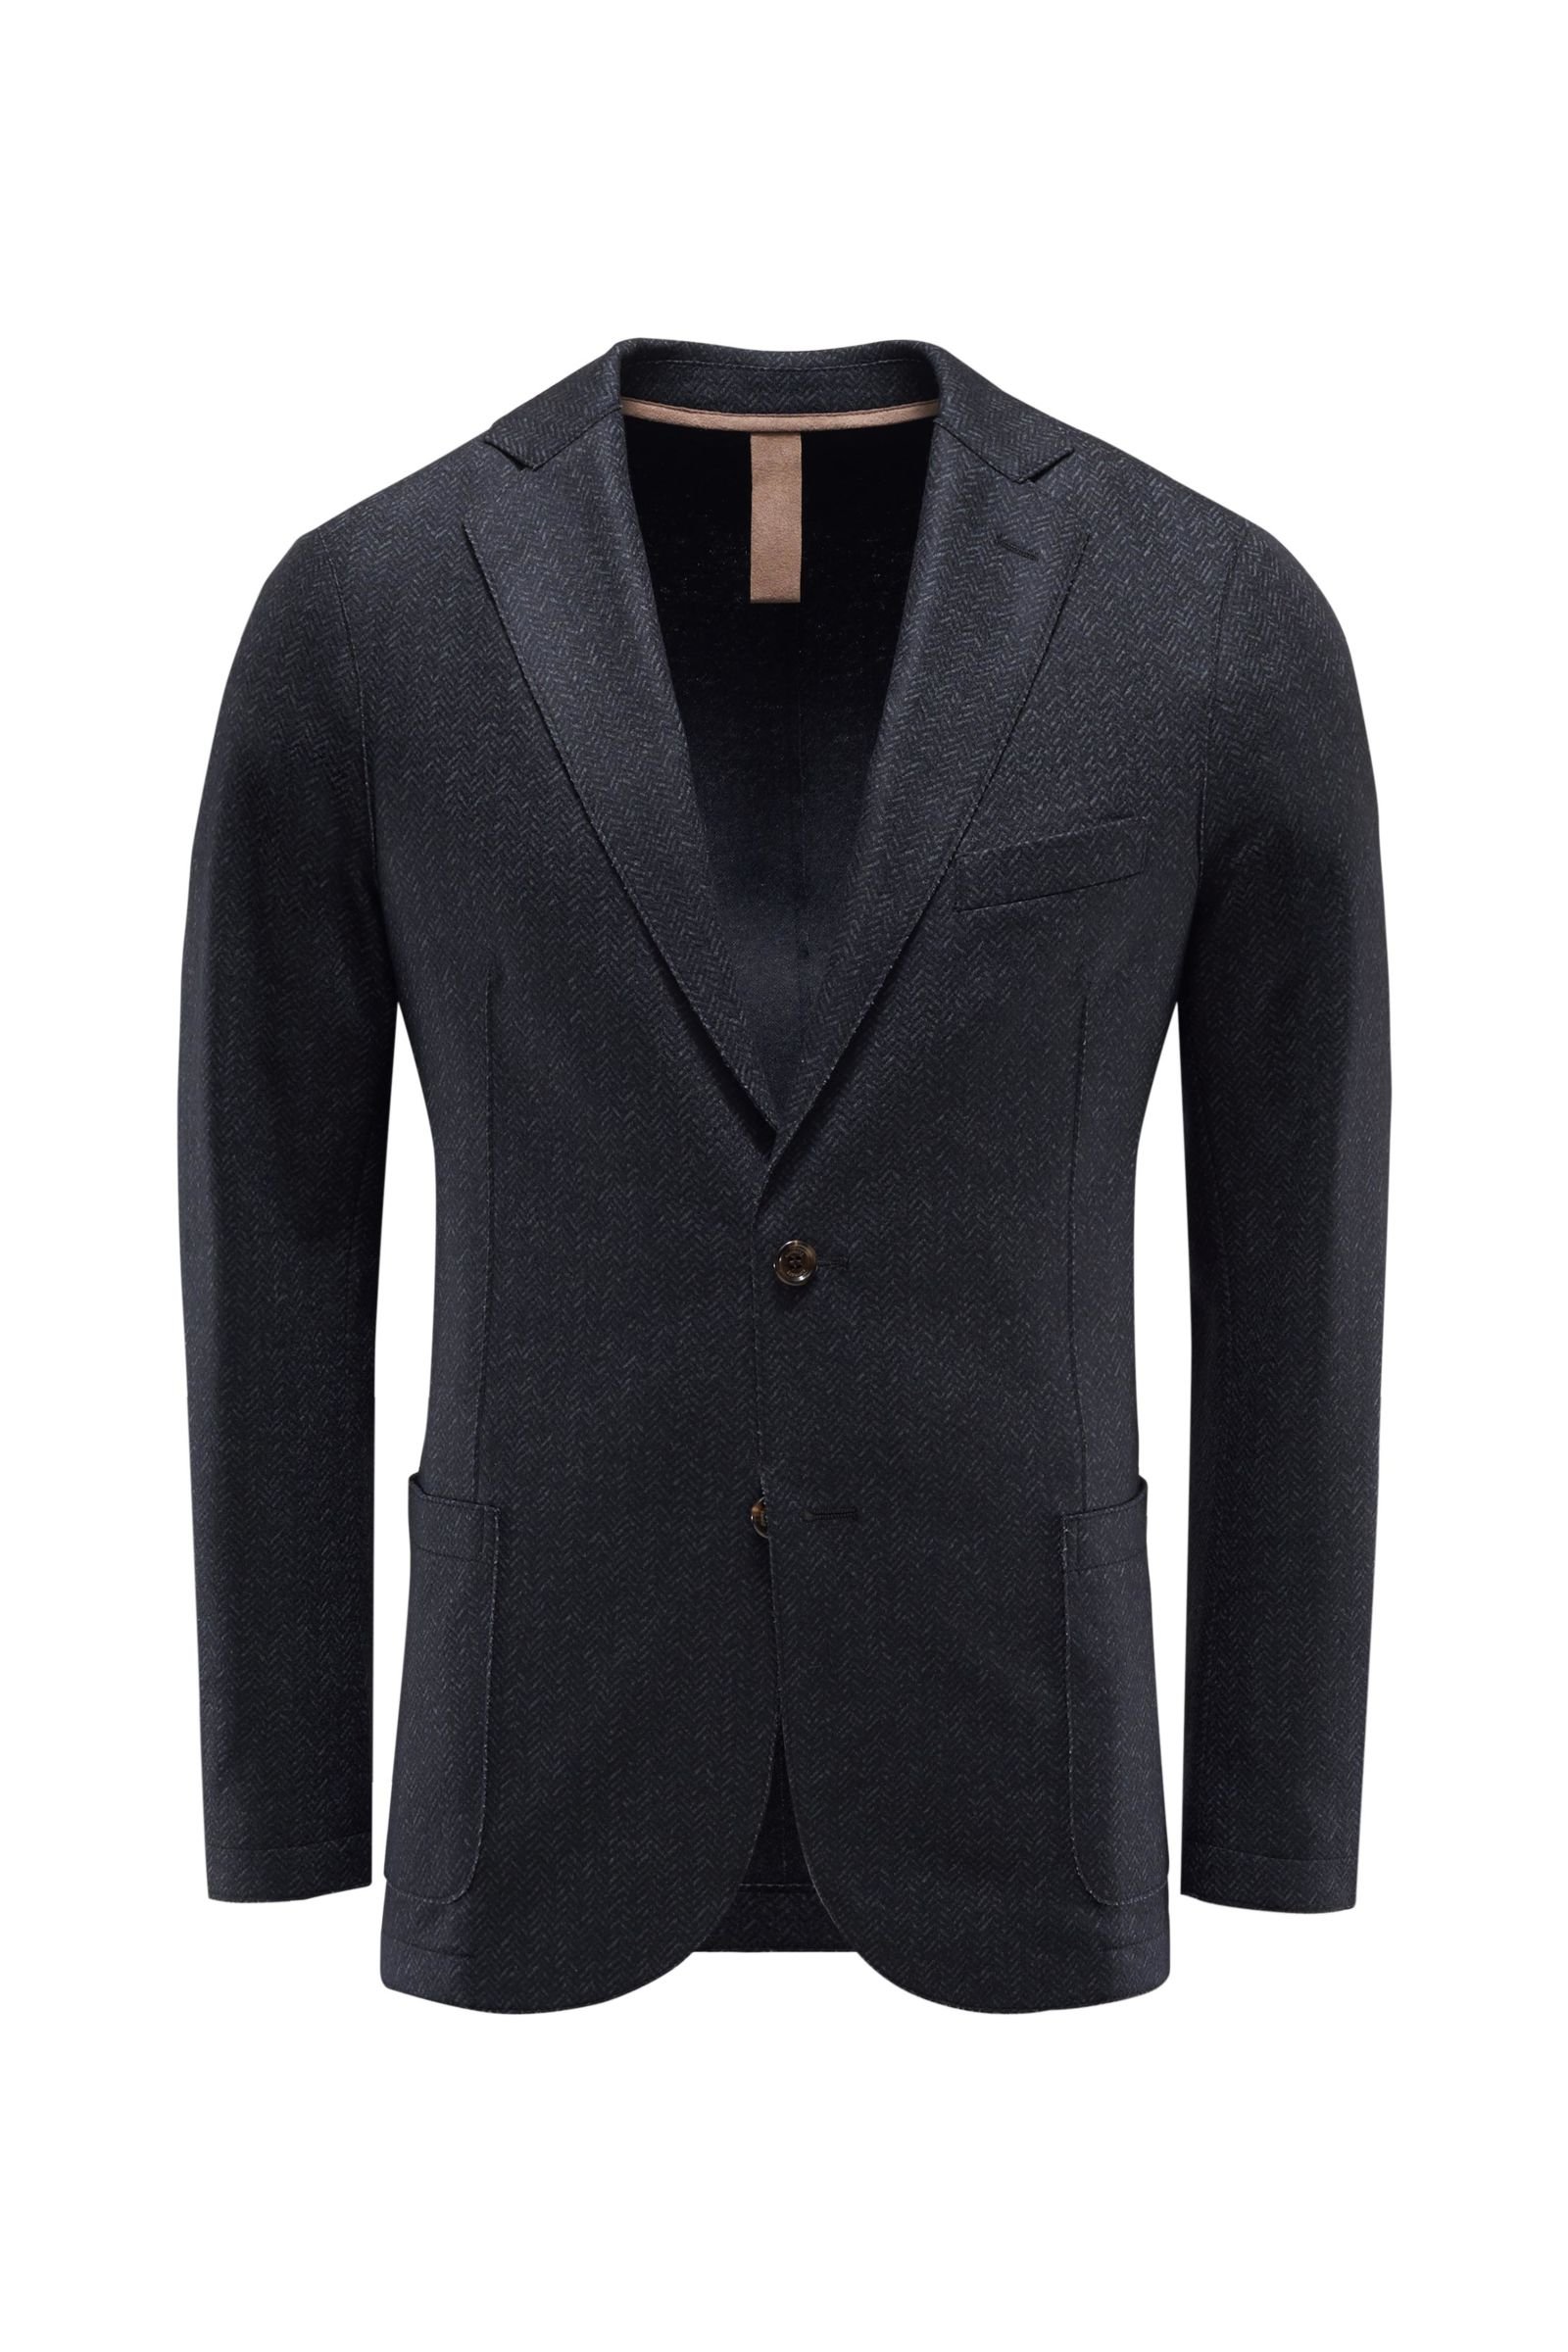 Jersey smart-casual jacket anthracite patterned